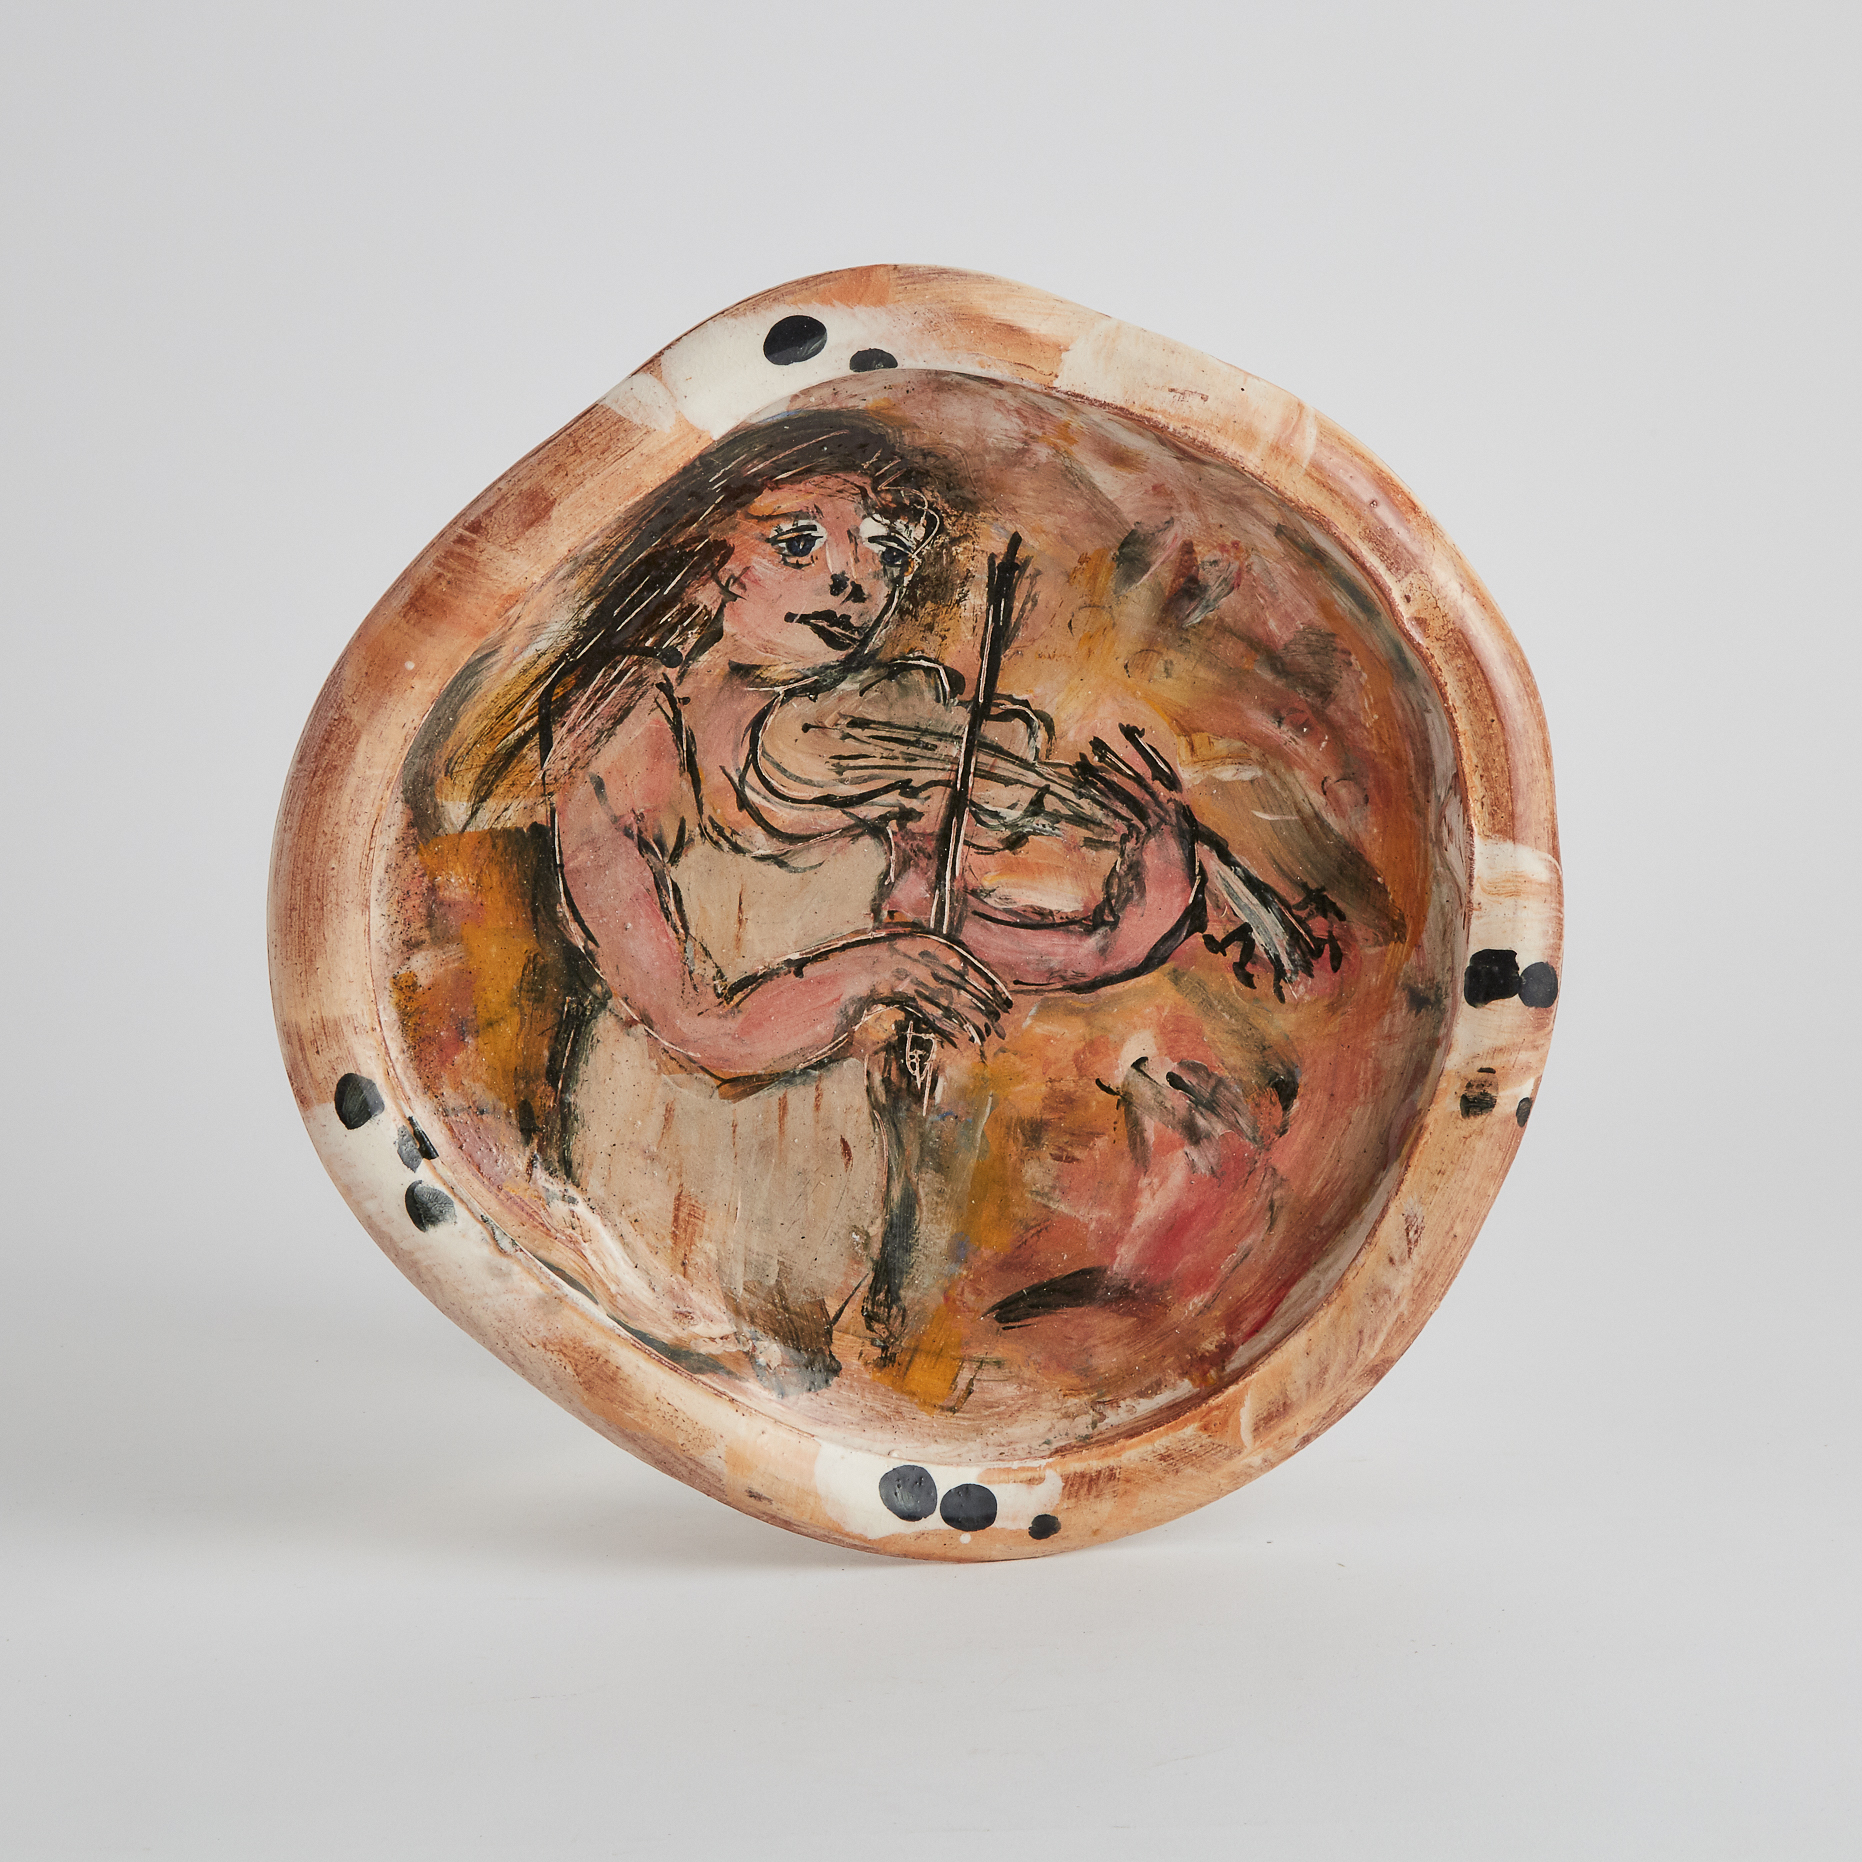 Ron Meyers (American, b.1934), Glazed Earthenware Dish with Violinist, c.2010